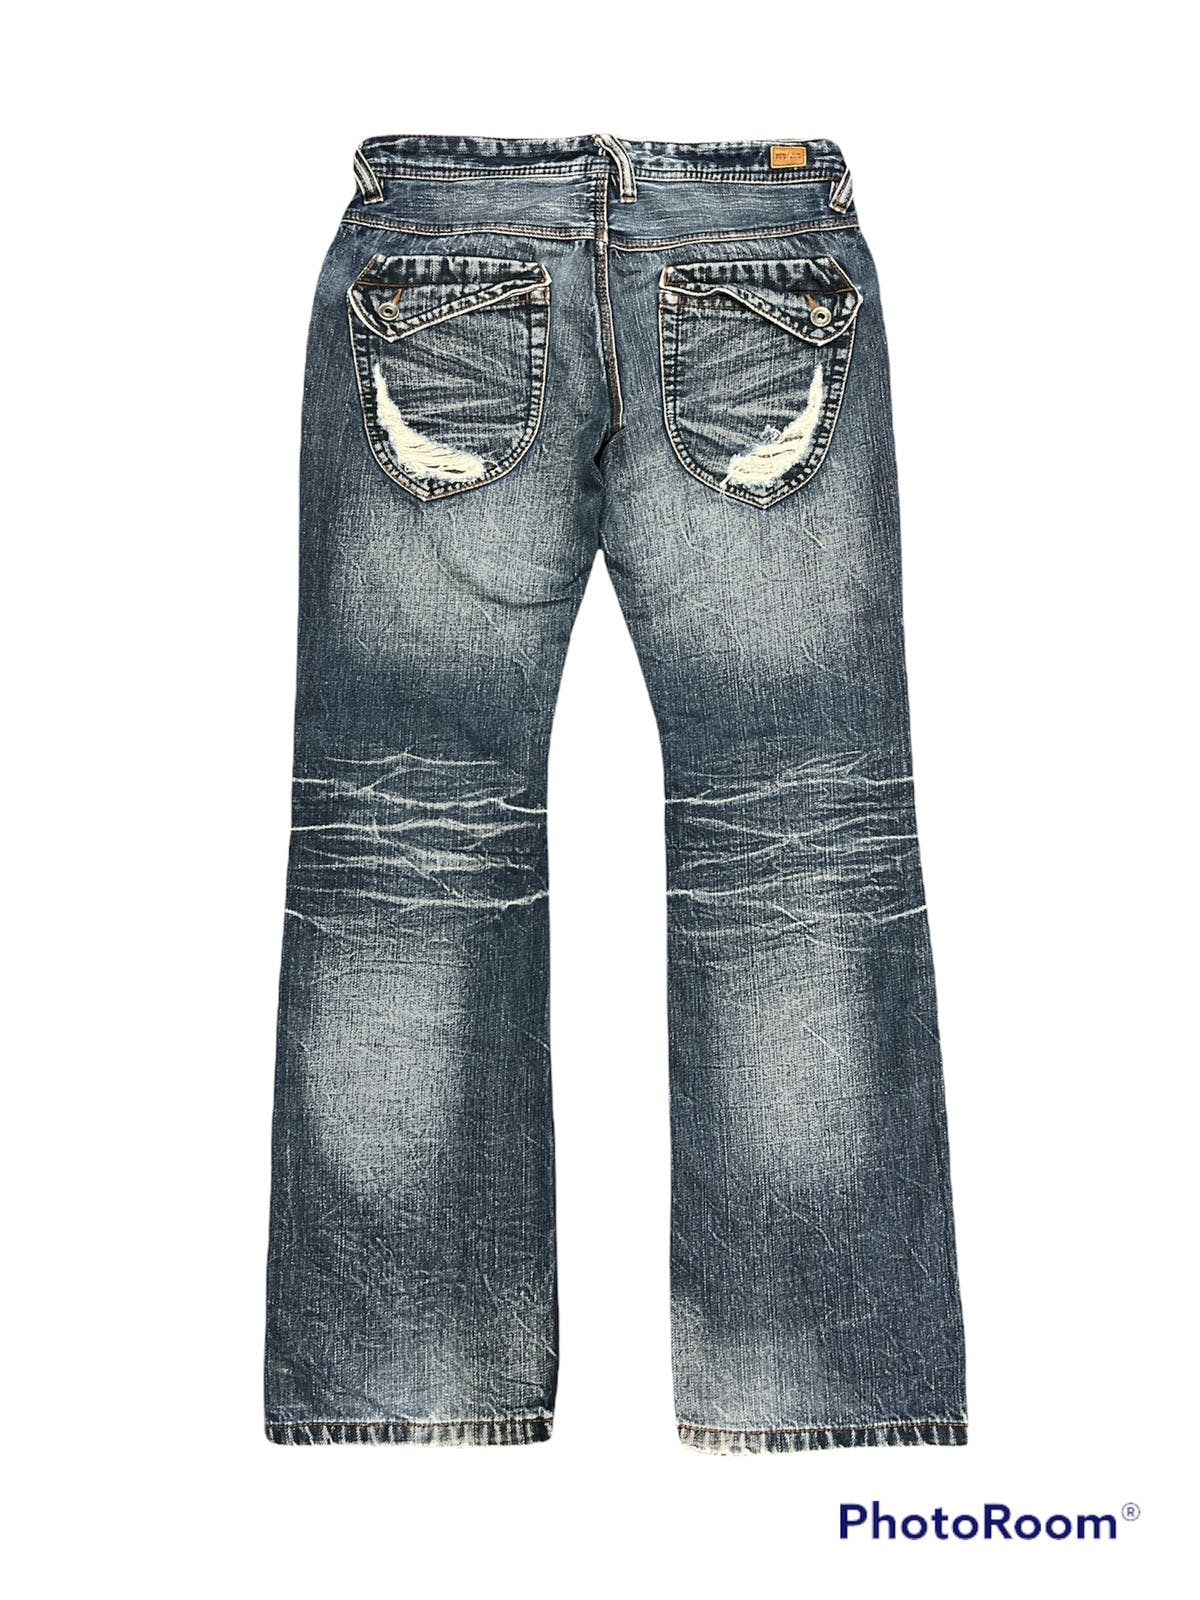 Distressed Japan Blue Flare by Nicole Club For Men Denim - 1